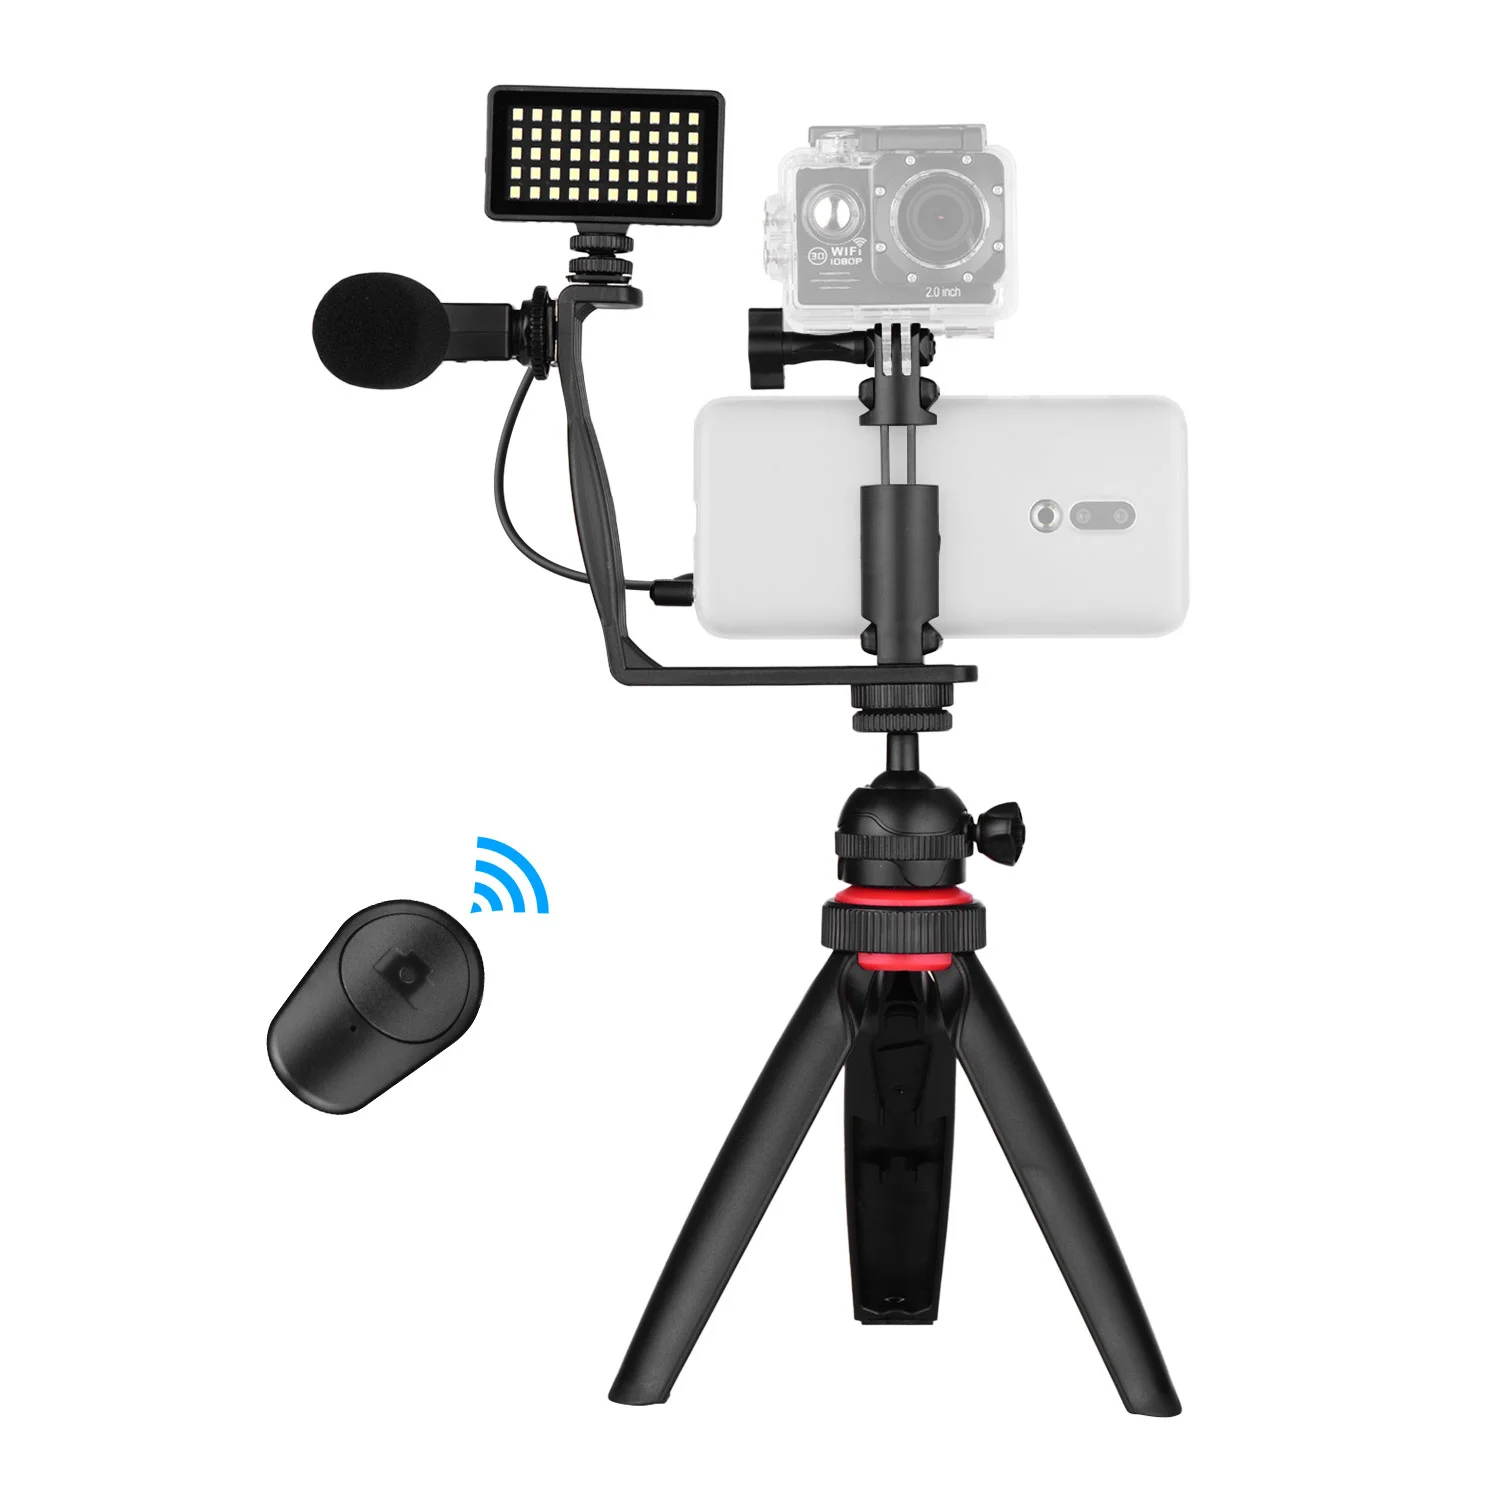 

Andoer Recording Video Vlog Kit Microphone Tripod Phone Holder Clip Mount for YouTube Live Vlogging Smartphone iPhone Android